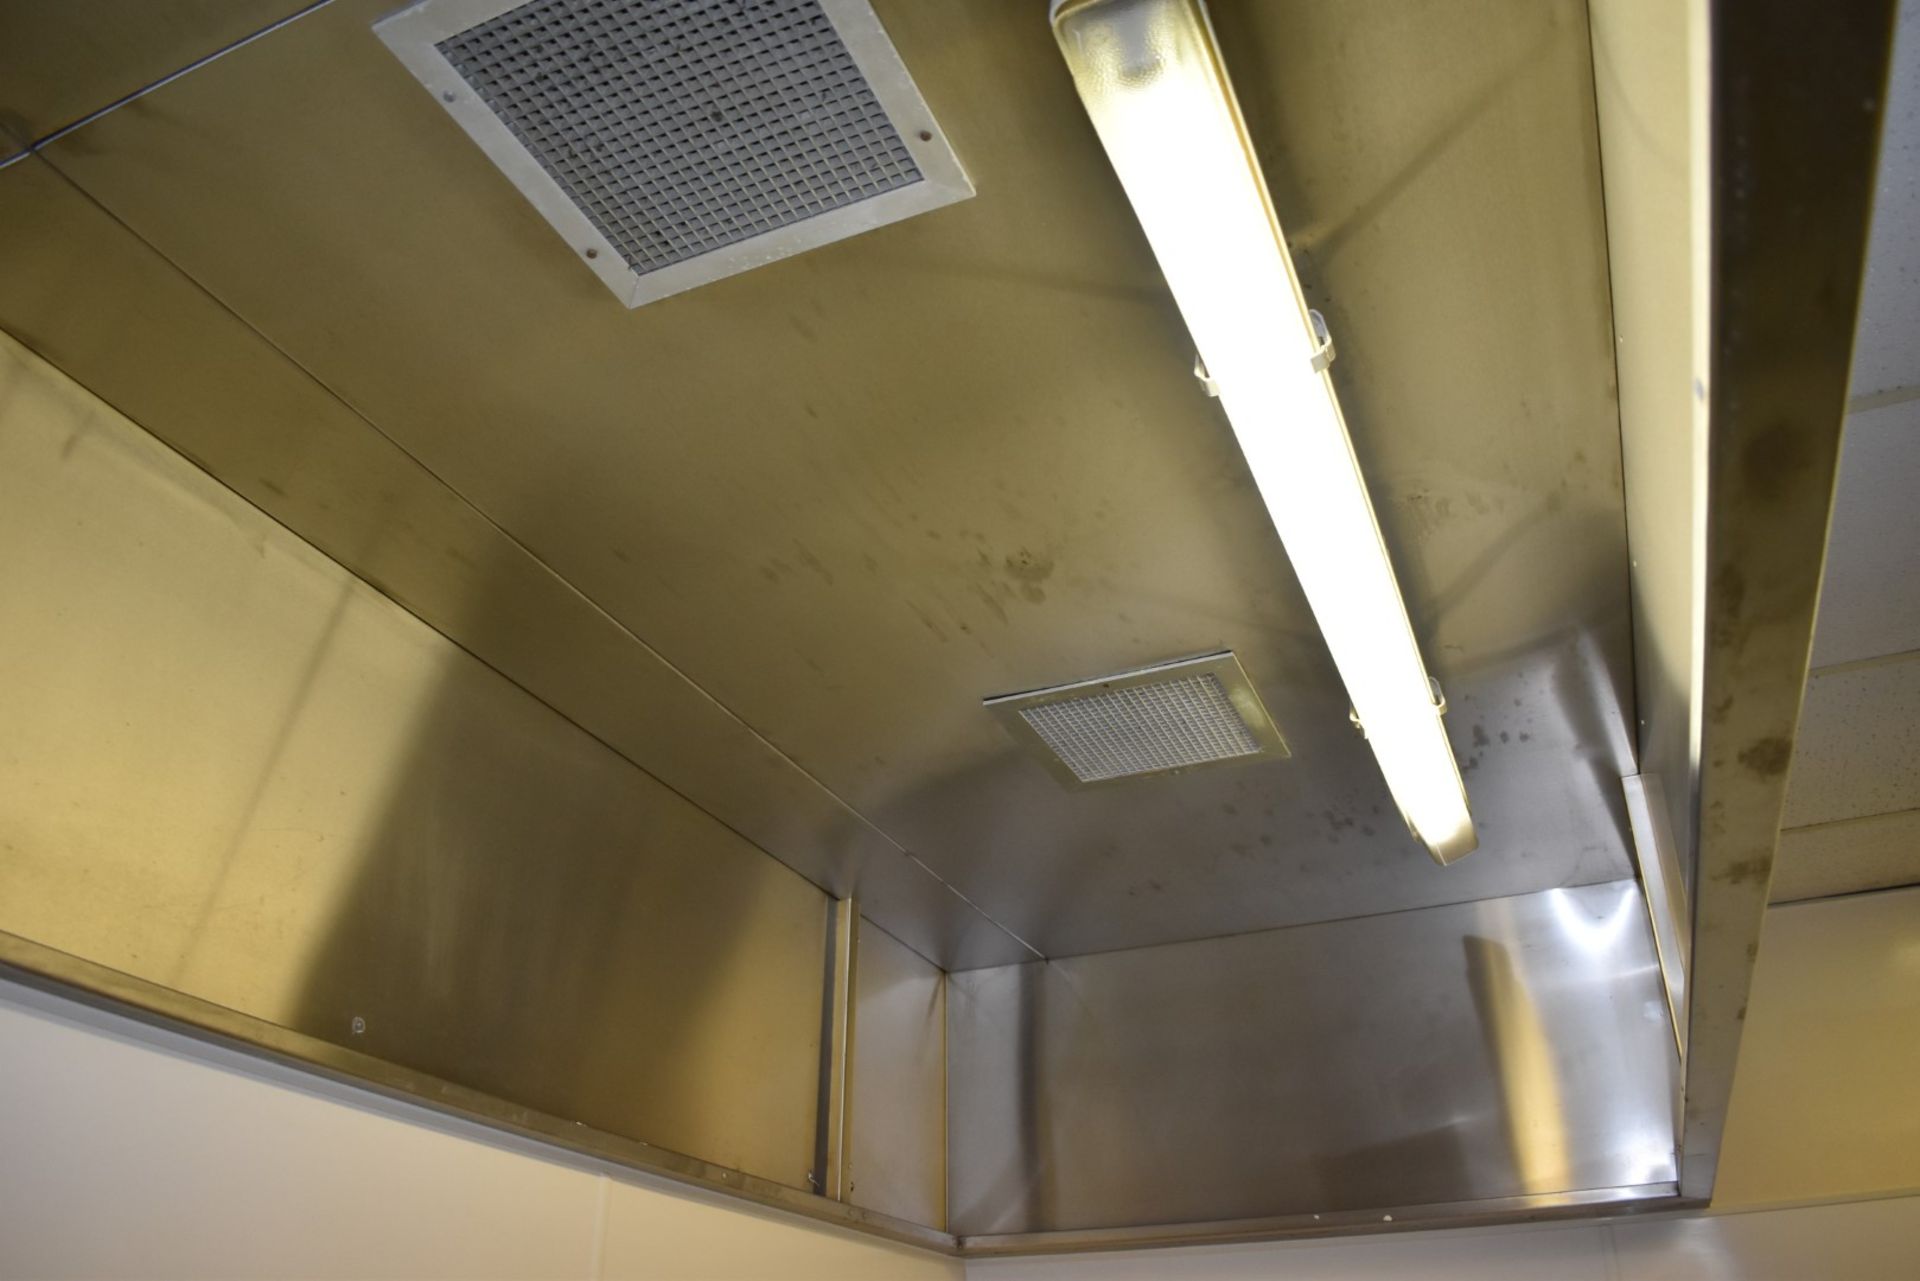 1 x Commerical Kitchen Ceiling Mounted Extractor Hood - Stainless Steel - Breaks into Multiple Parts - Image 6 of 8